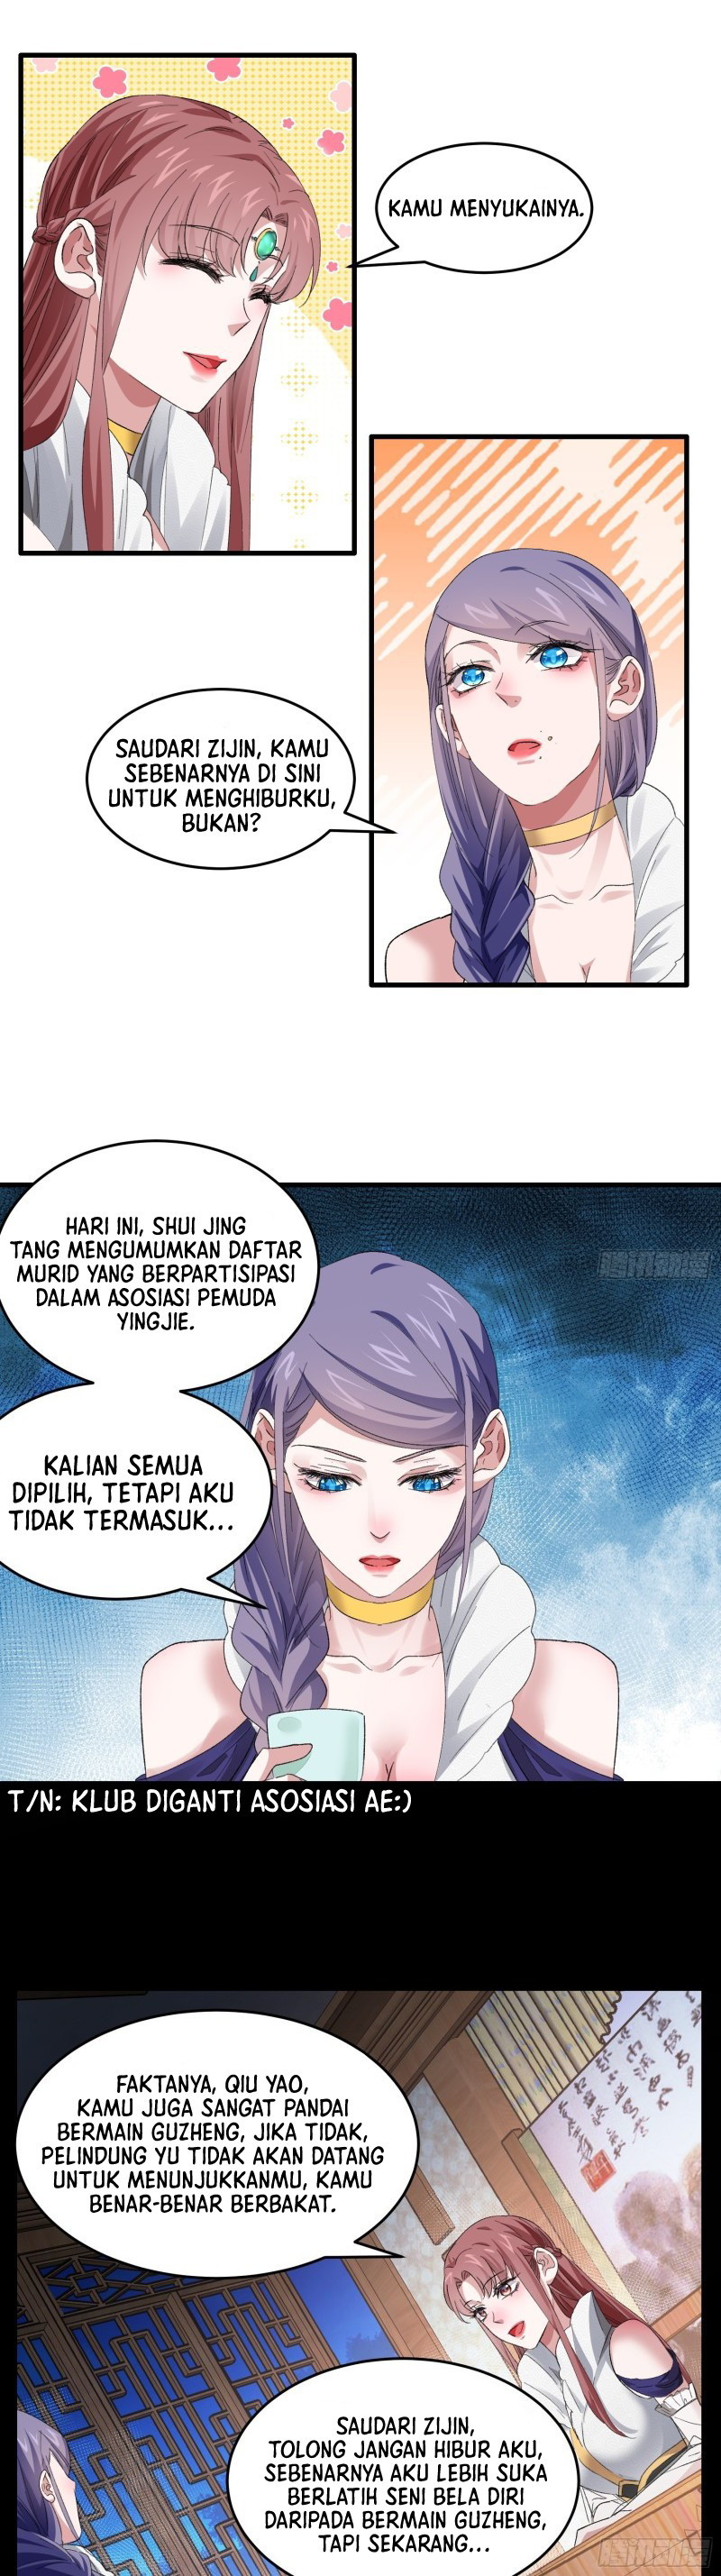 Dilarang COPAS - situs resmi www.mangacanblog.com - Komik i just dont play the card according to the routine 049 - chapter 49 50 Indonesia i just dont play the card according to the routine 049 - chapter 49 Terbaru 25|Baca Manga Komik Indonesia|Mangacan